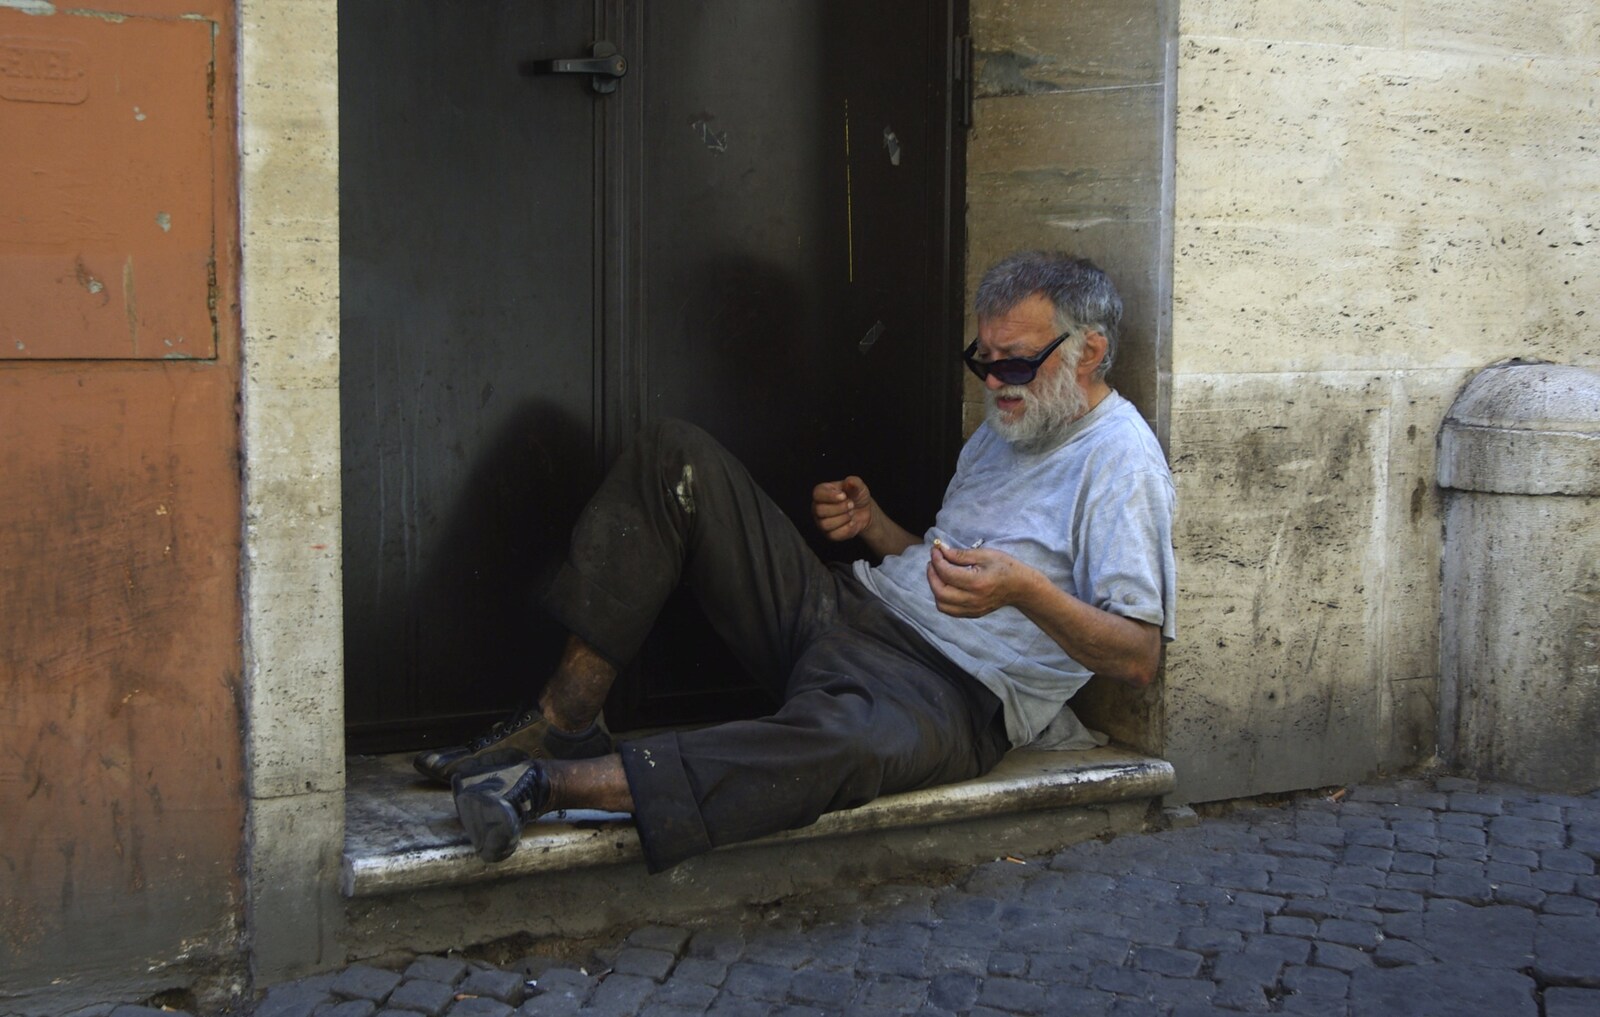 A homeless dude sits in a doorway from A Sojourn in The Eternal City, Rome, Italy - 22nd July 2008